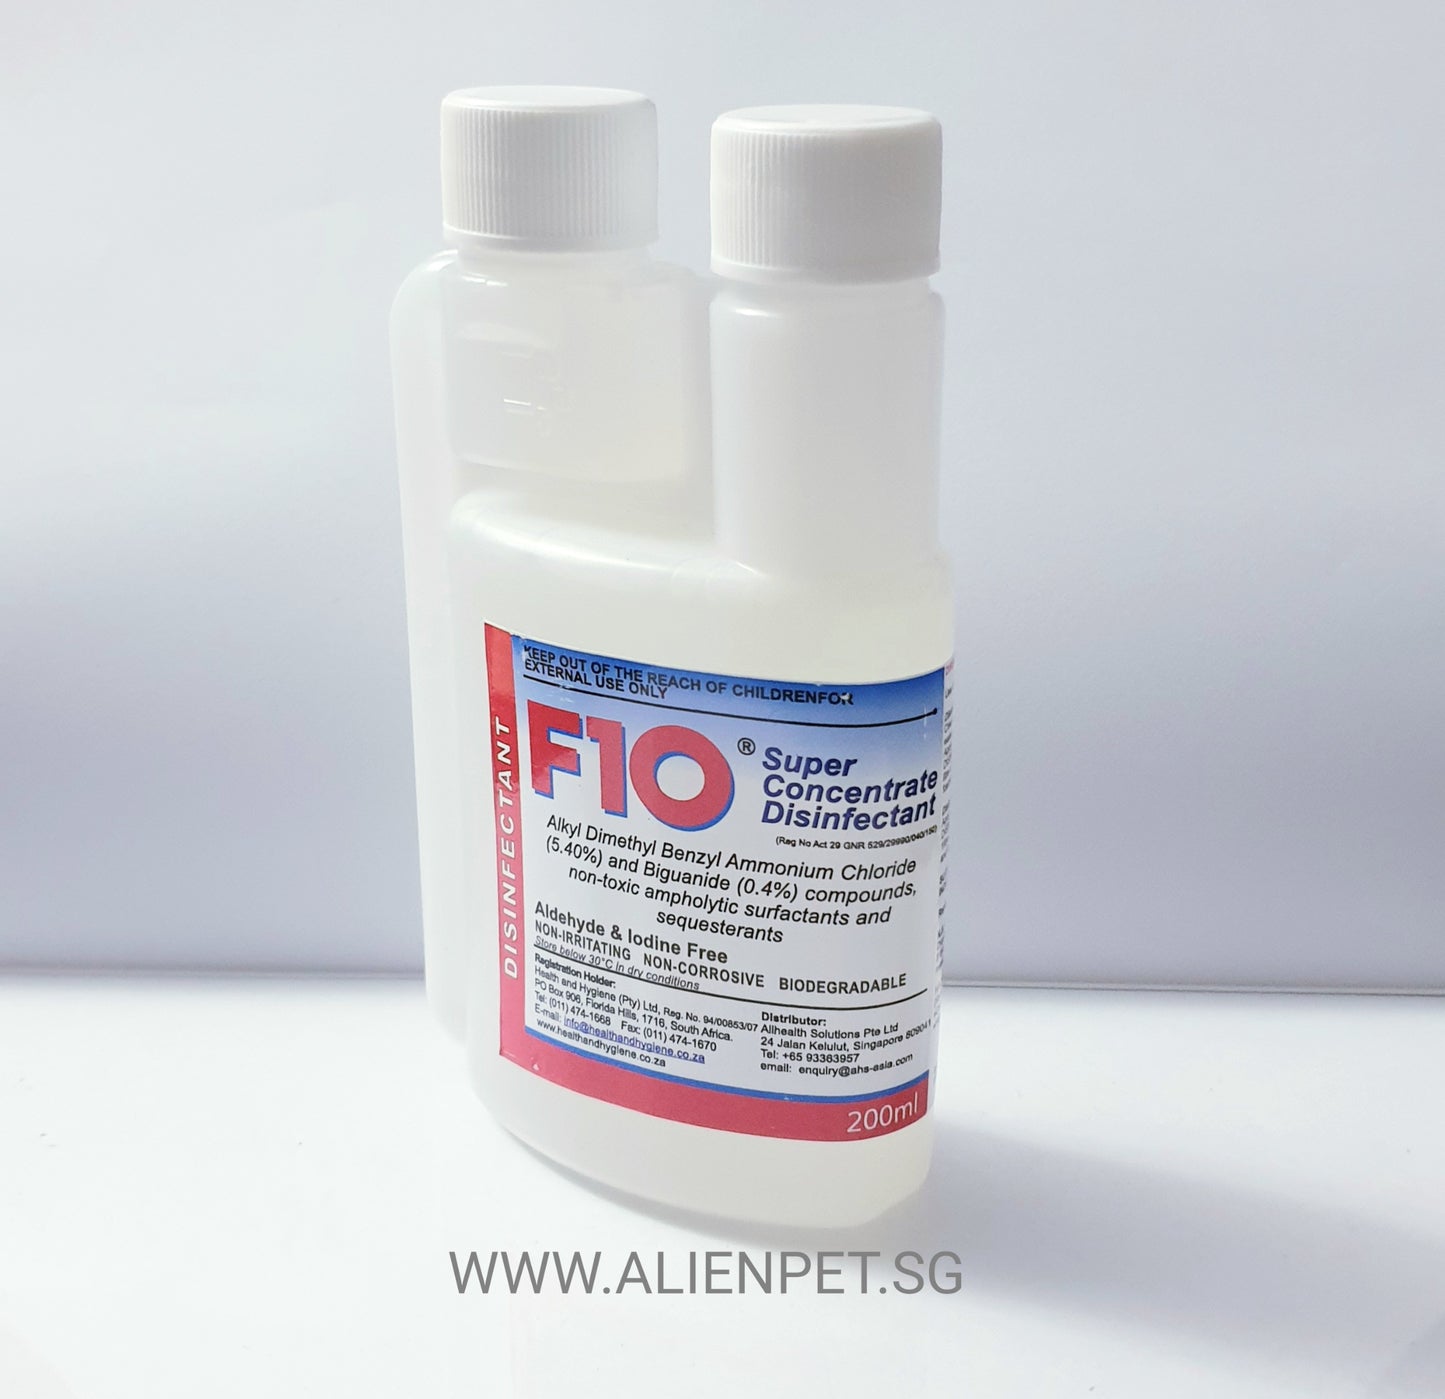 F10 Super Concentrate Disinfectant - Advise to read Warnings and follow vet's instruction